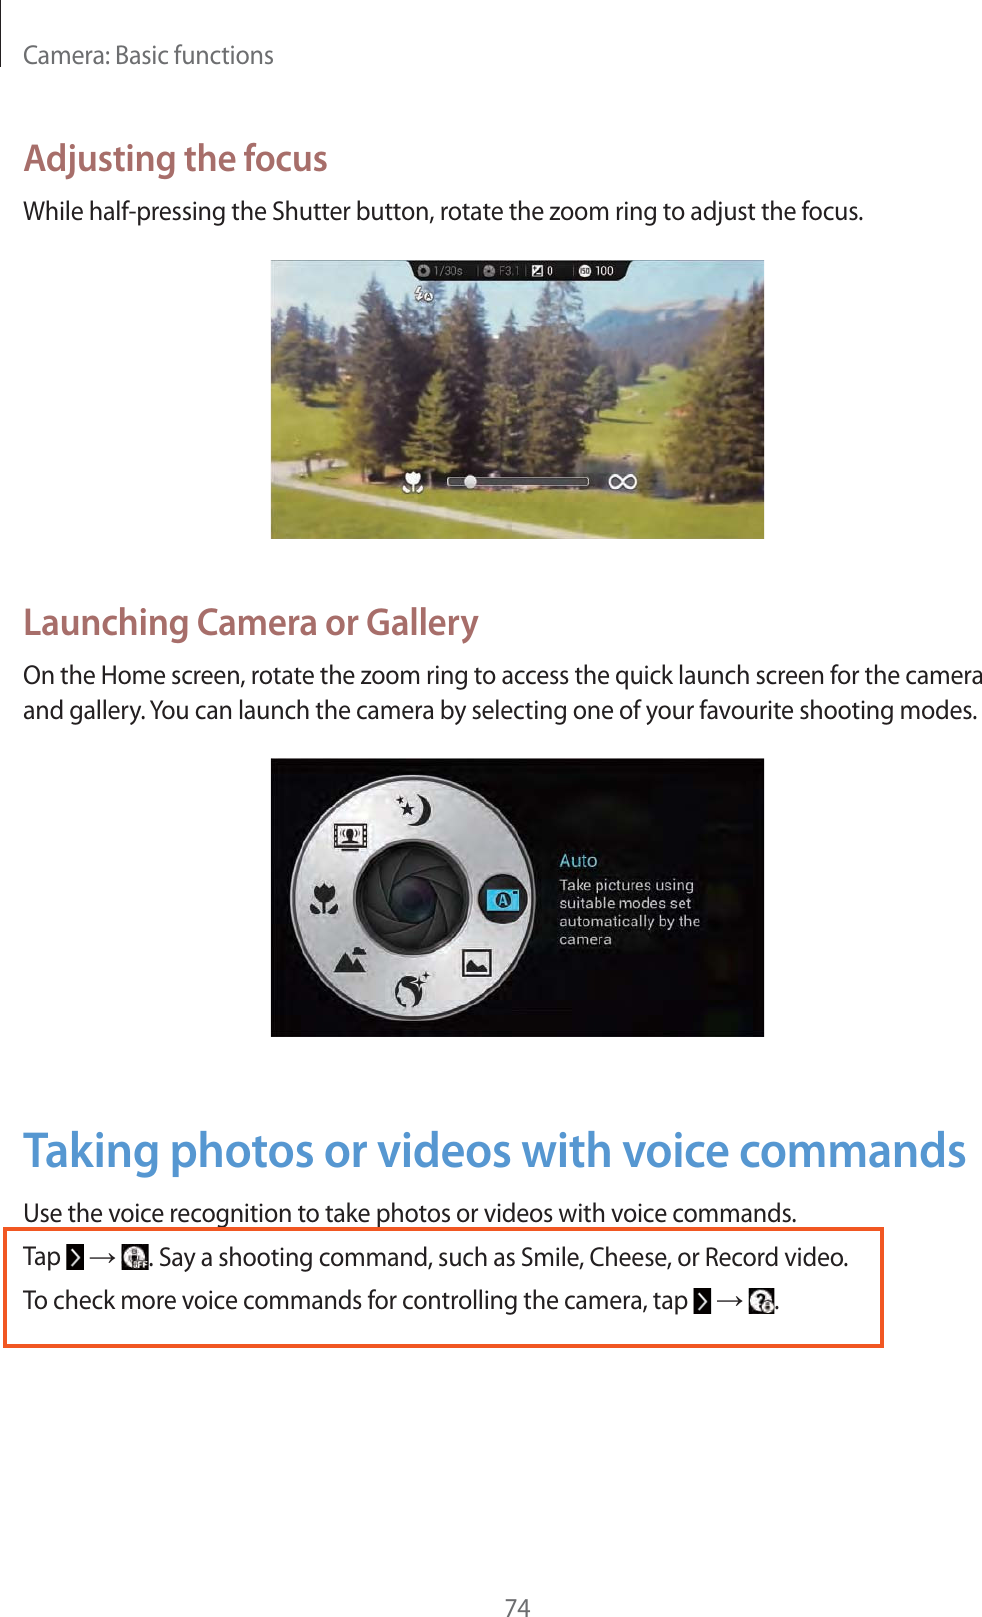 Camera: Basic functions74Adjusting the focusWhile half-pressing the Shutter button, rotate the zoom ring to adjust the focus.Launching Camera or GalleryOn the Home screen, rotate the zoom ring to access the quick launch screen for the camera and gallery. You can launch the camera by selecting one of your favourite shooting modes.Taking photos or videos with voice commandsUse the voice recognition to take photos or videos with voice commands.Tap    . Say a shooting command, such as Smile, Cheese, or Record video.To check more voice commands for controlling the camera, tap     .